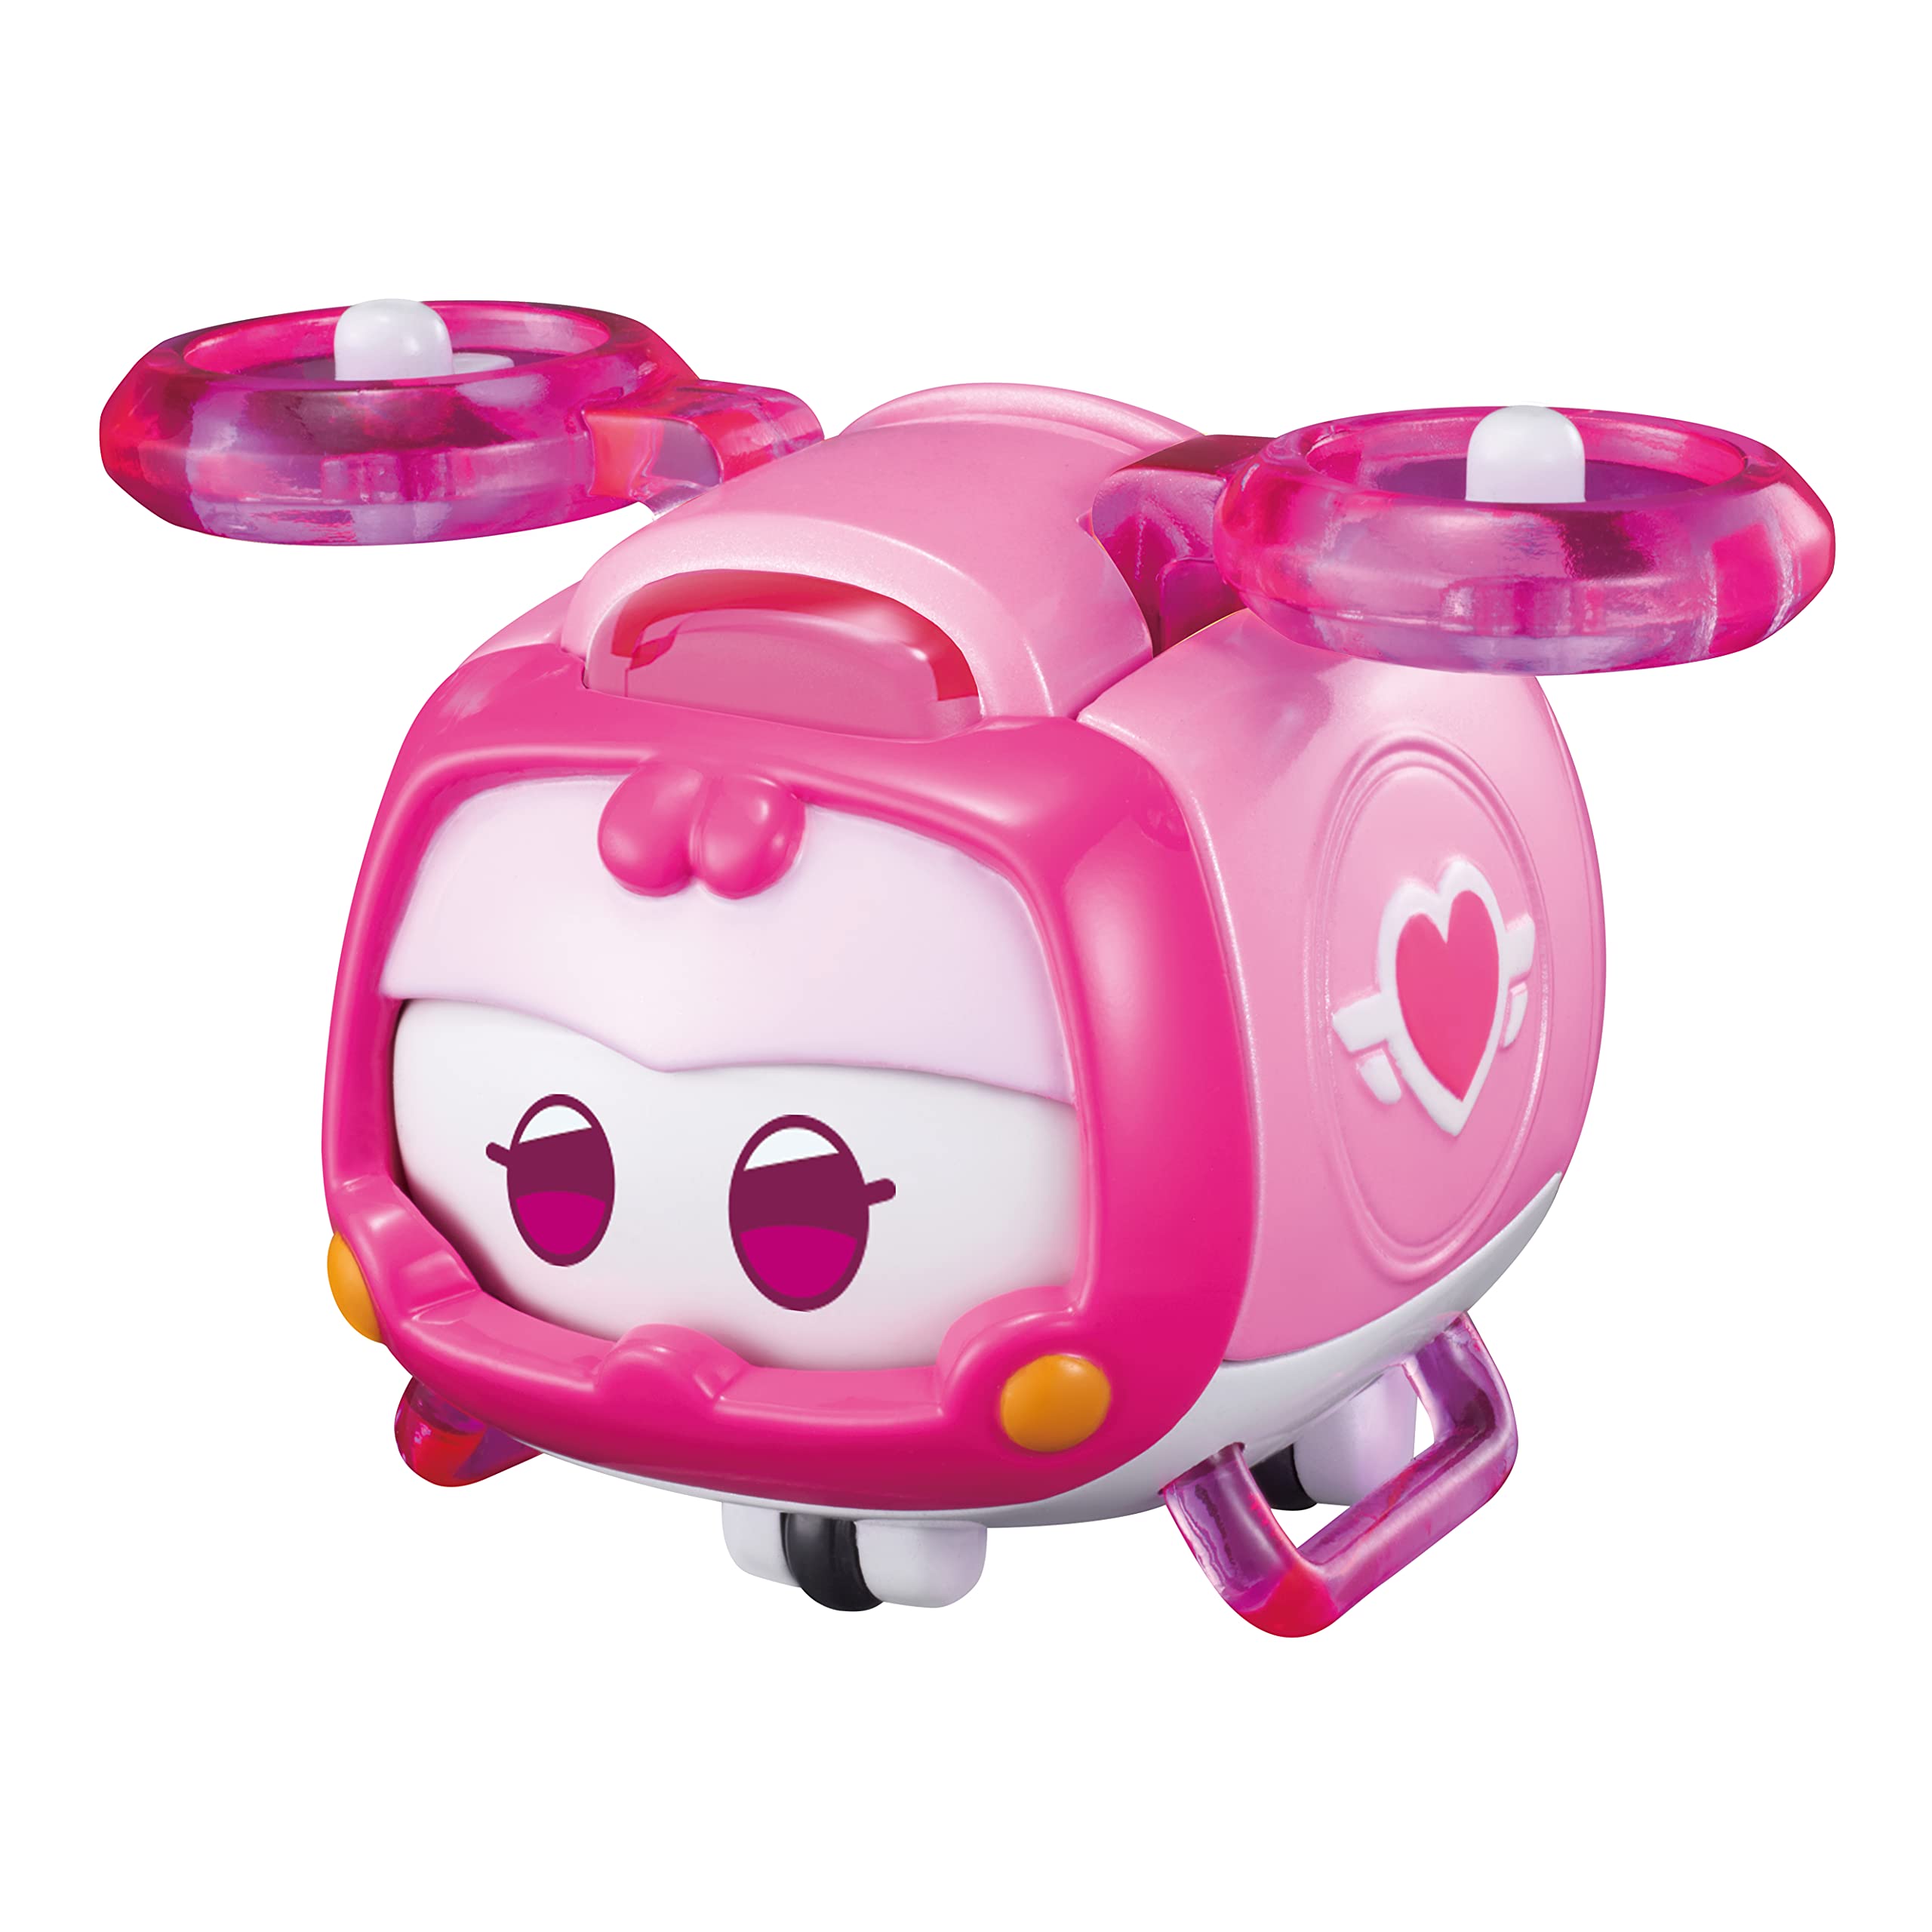 Super Wings Super Pets 4-Pack Collection Super Pets Jett, Donnie, Paul, Dizzy, Vehicle Action Figure, Superwings Transforming Plane to Robot, Gifts for Kids Aged 3 and Up, Light Effect